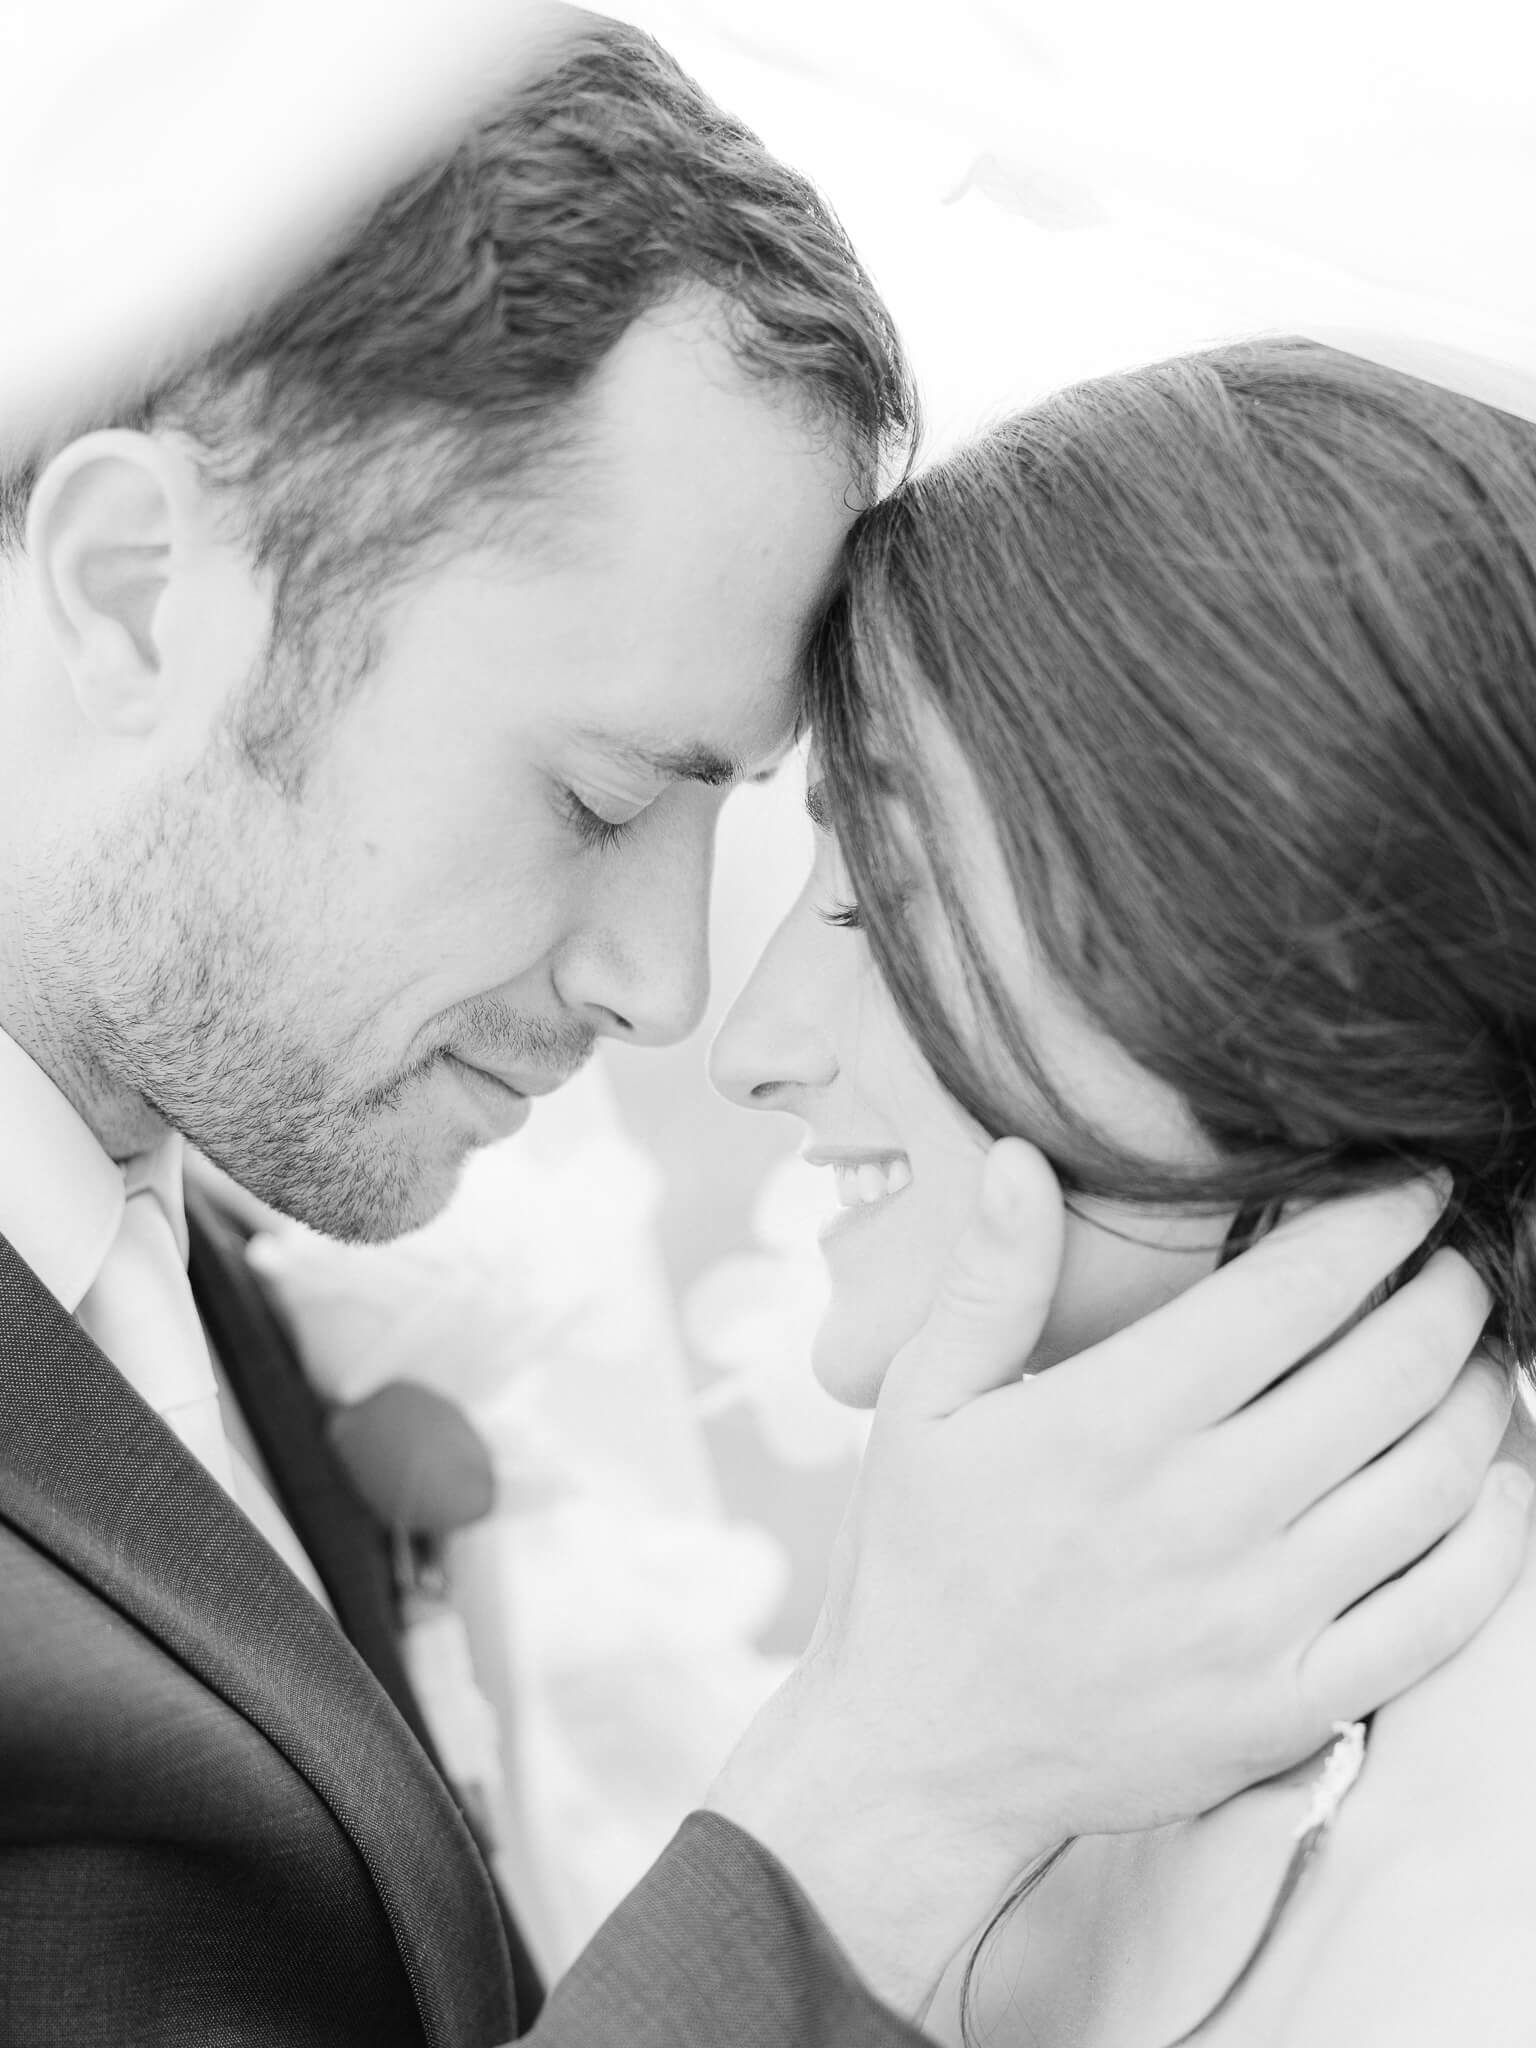 A black and white image of a groom resting his forehead against the bride's while holding her face in his hand.